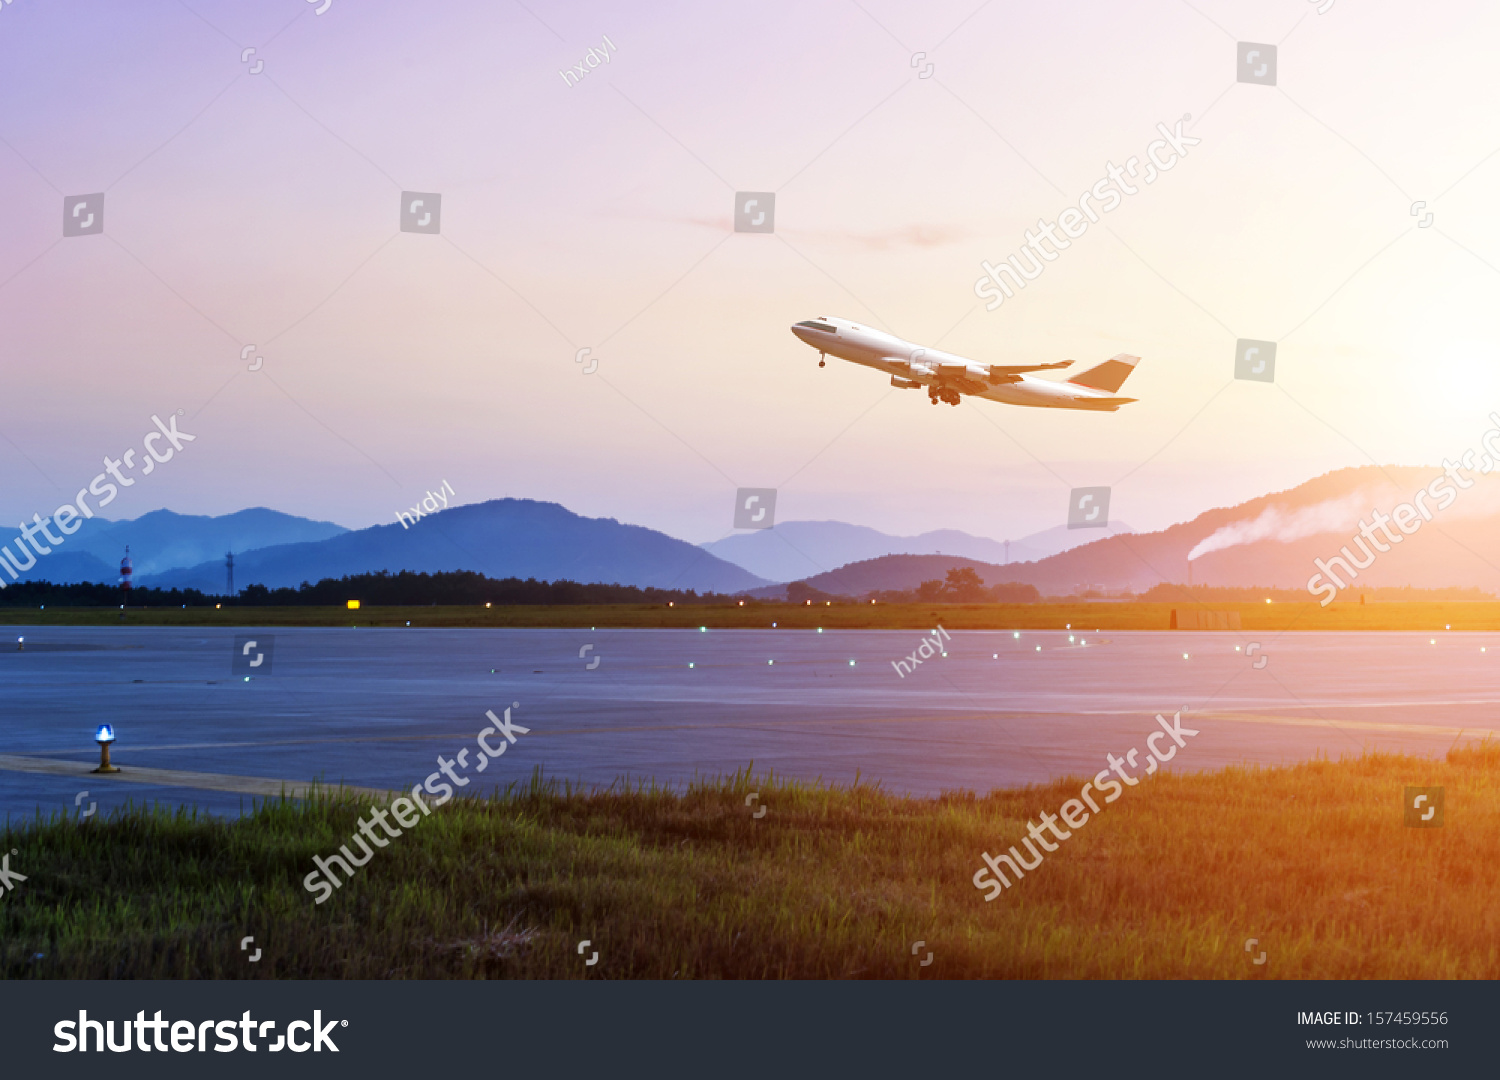 passenger plane fly up over take-off runway from airport at sunset #157459556